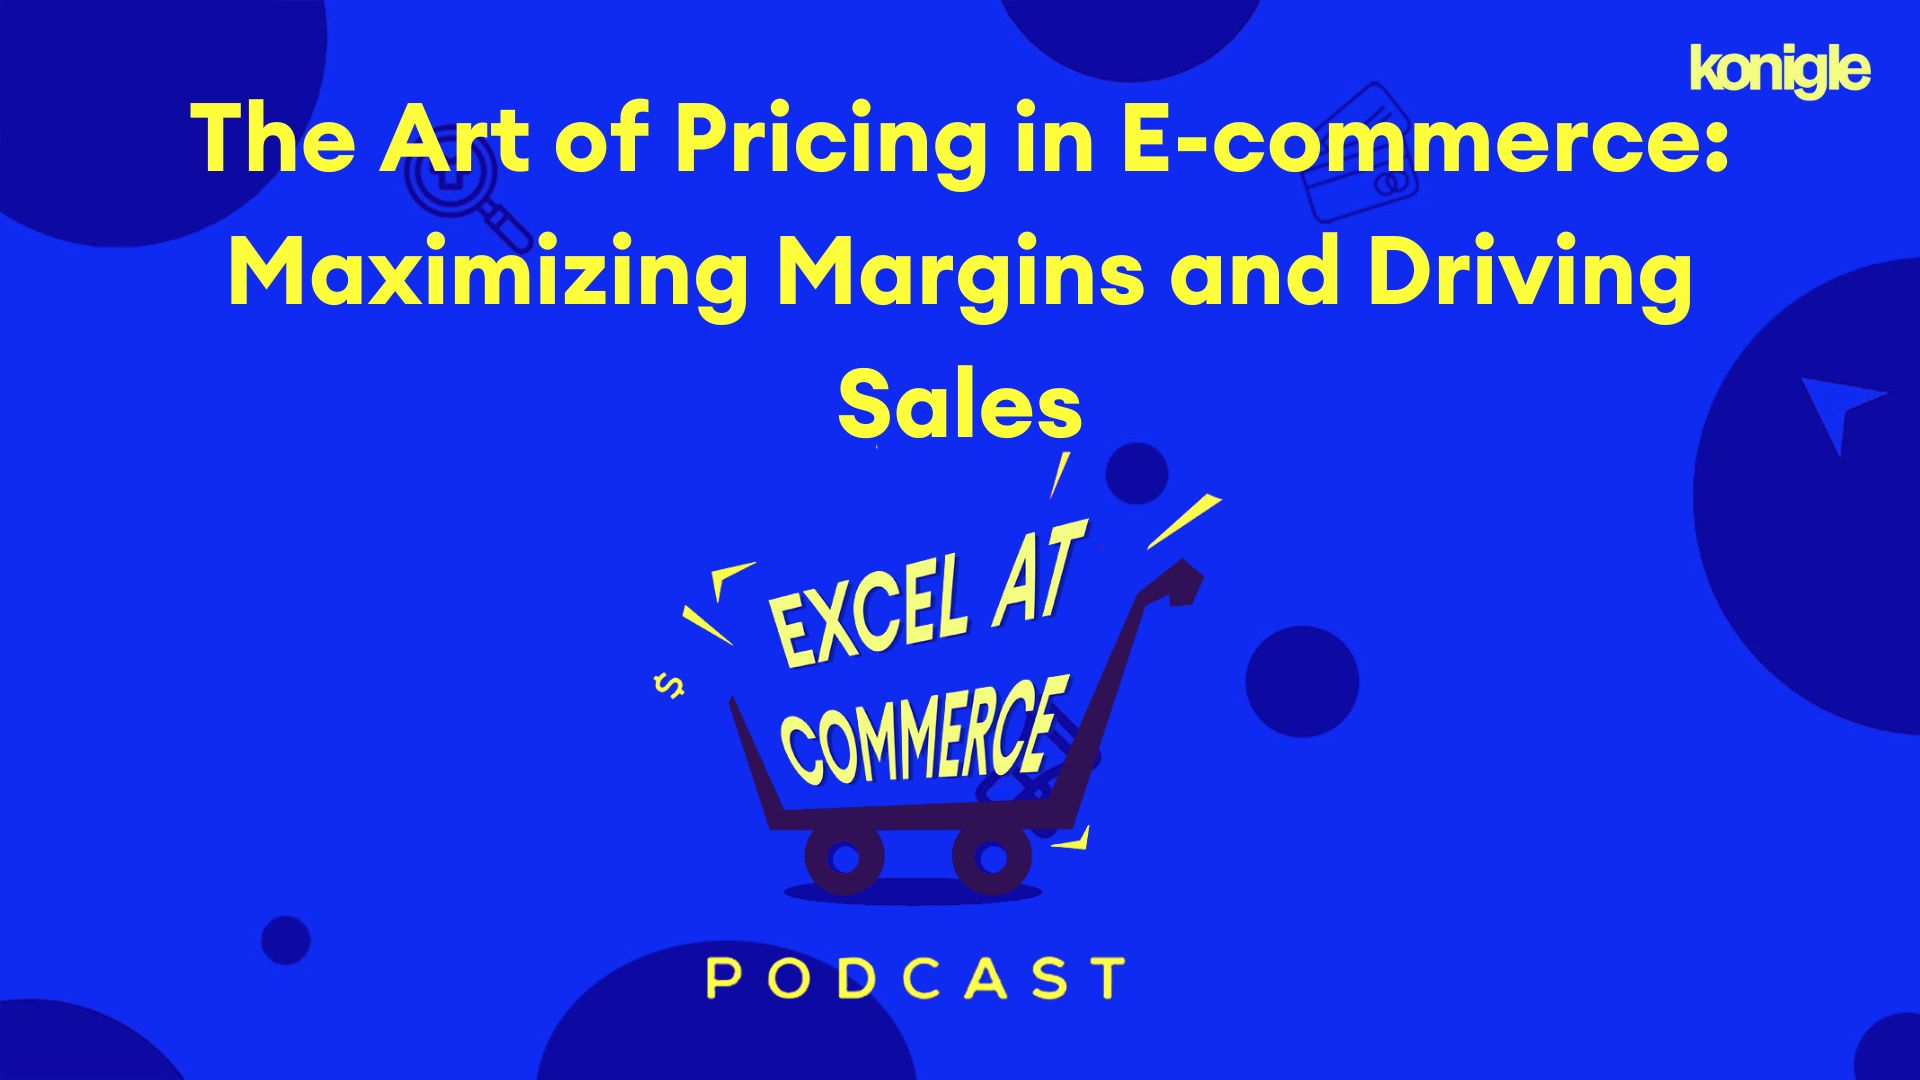 The Art of Pricing in E-commerce: Maximizing Margins and Driving Sales